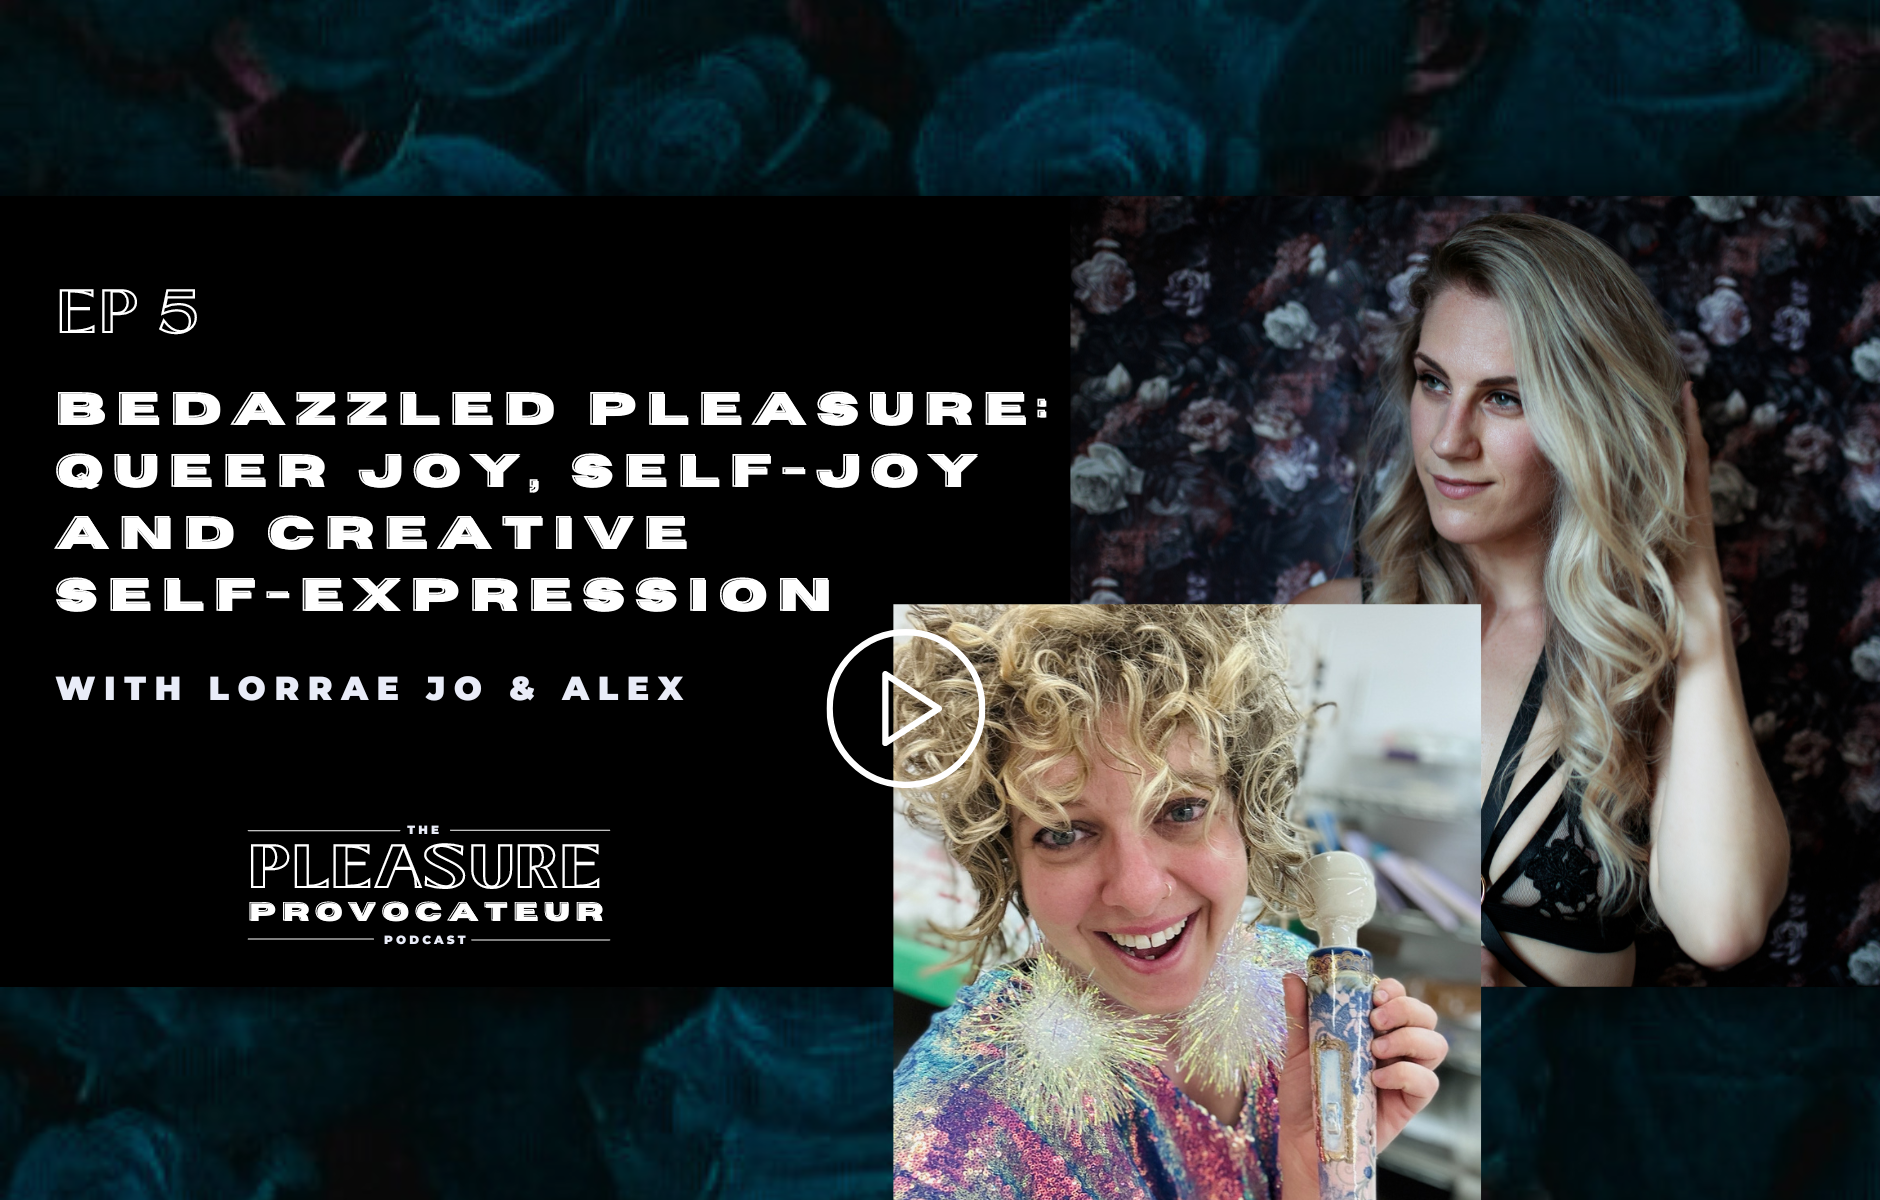 Listen to the full interview with Alex of MakeGoodChocies, part of the Erotic Artistry series on The Pleasure Provocateur podcast.